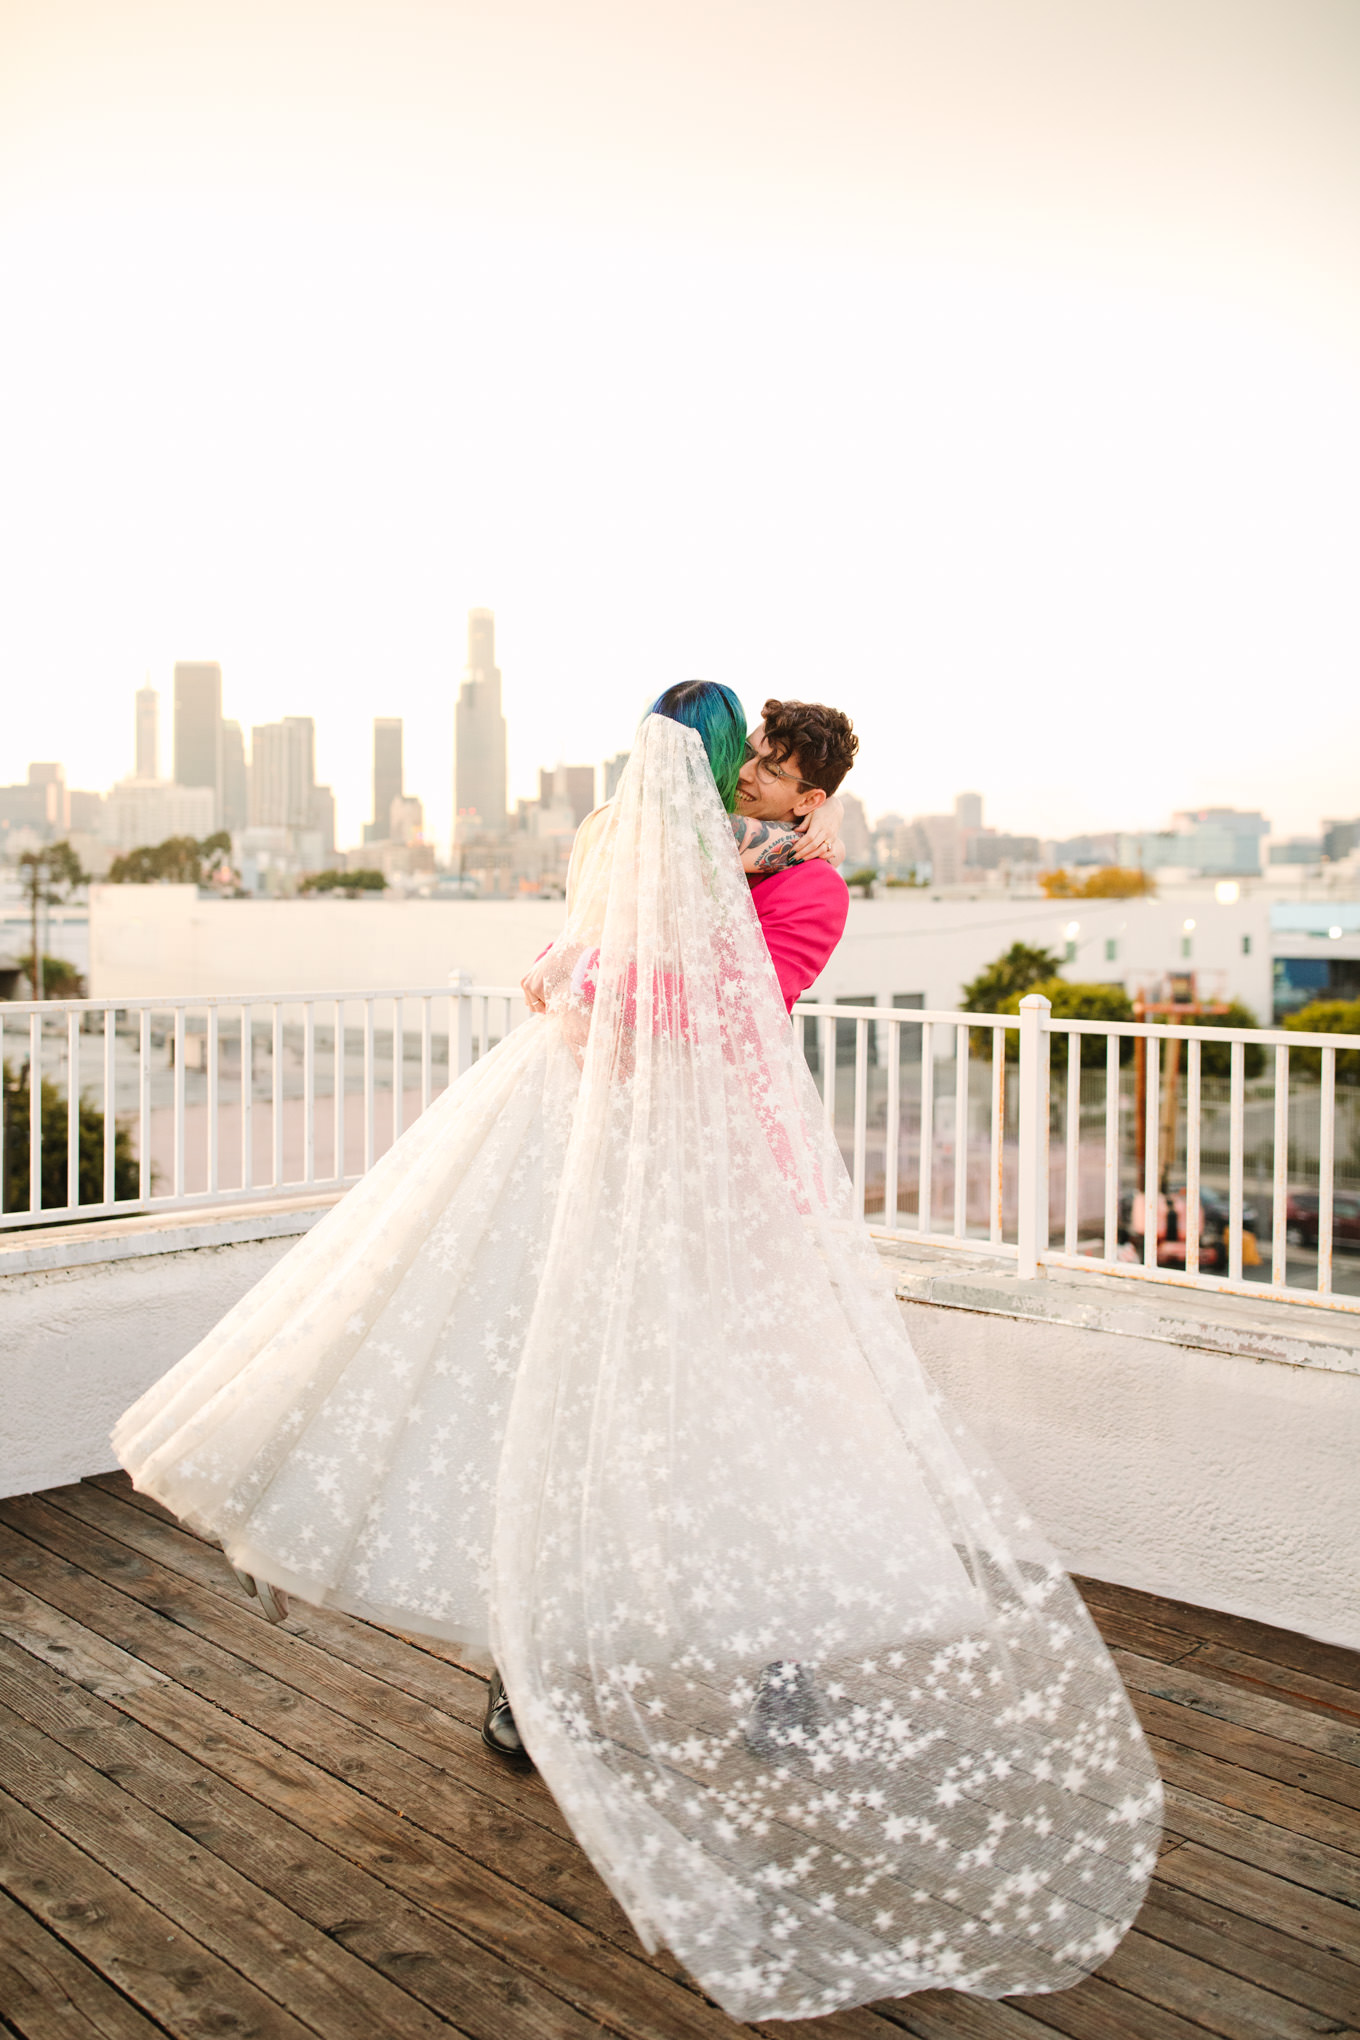 Portraits on rooftop with green hair bride in star gown and groom in hot pink suit | Colorful wedding at The Unique Space Los Angeles published in The Knot Magazine | Fresh and colorful photography for fun-loving couples in Southern California | #colorfulwedding #losangeleswedding #weddingphotography #uniquespace Source: Mary Costa Photography | Los Angeles